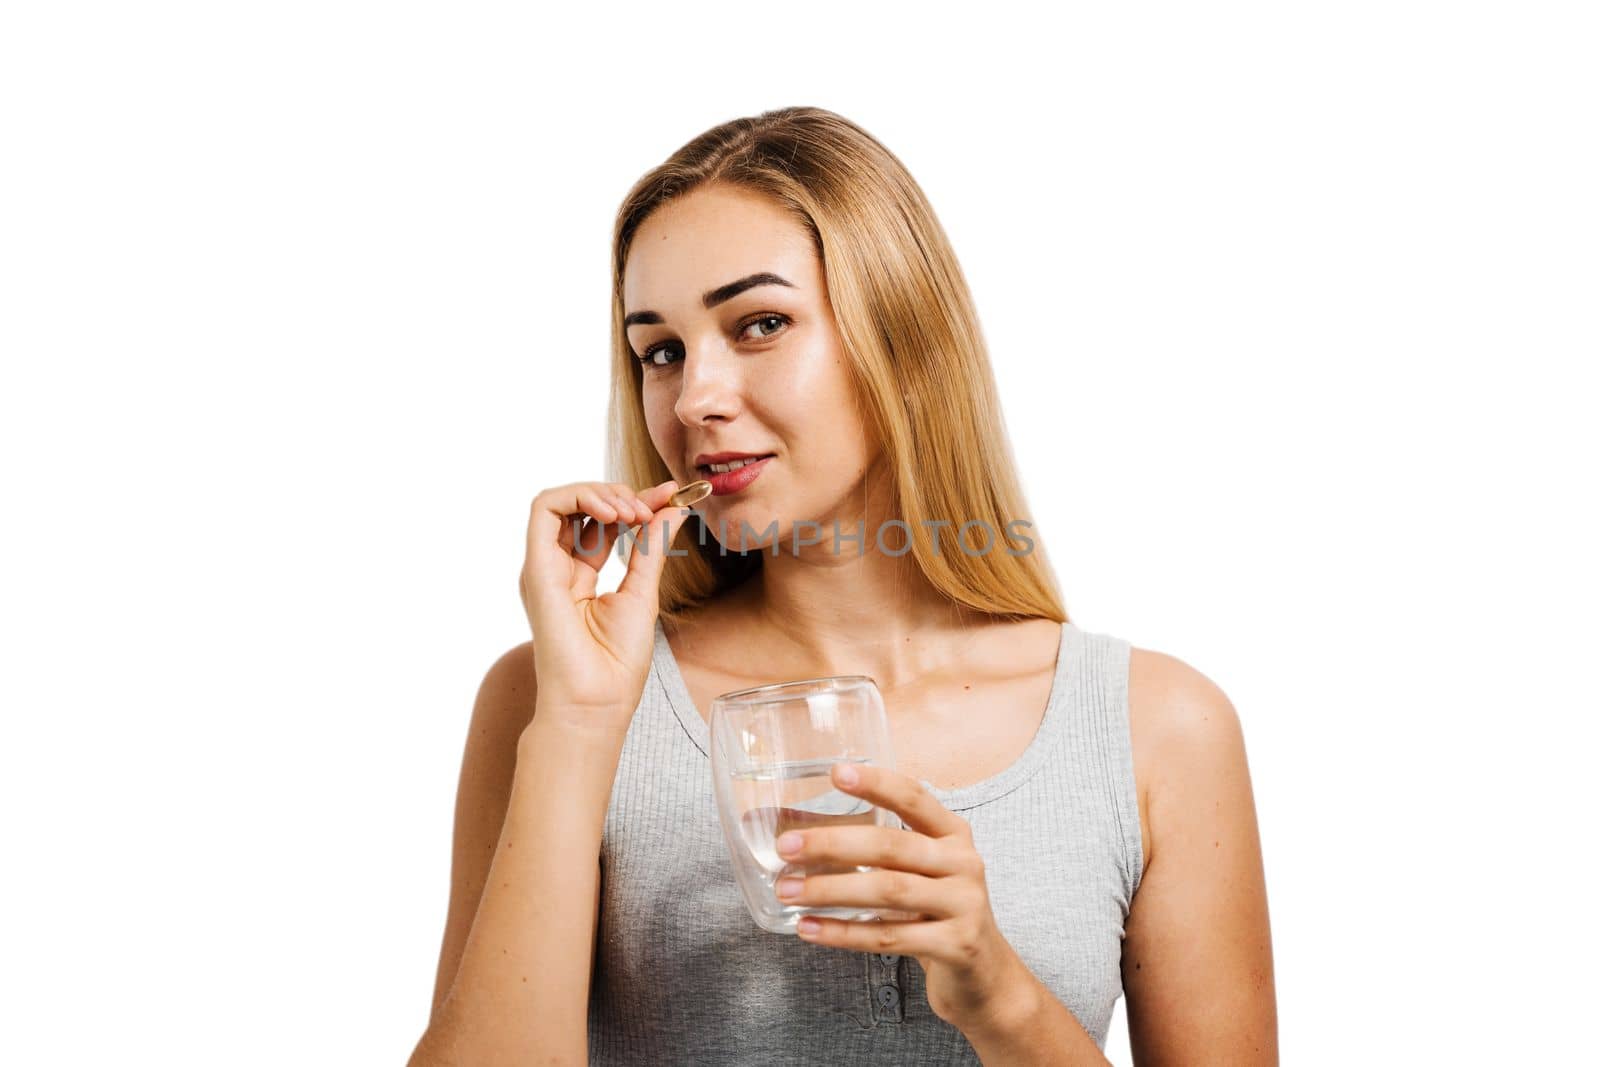 Girl with Omega-3 capsule and cup of water is taking a BADS capsule on white background. Biologically active dietary supplements. Taking vitamin D for building and maintaining healthy bones